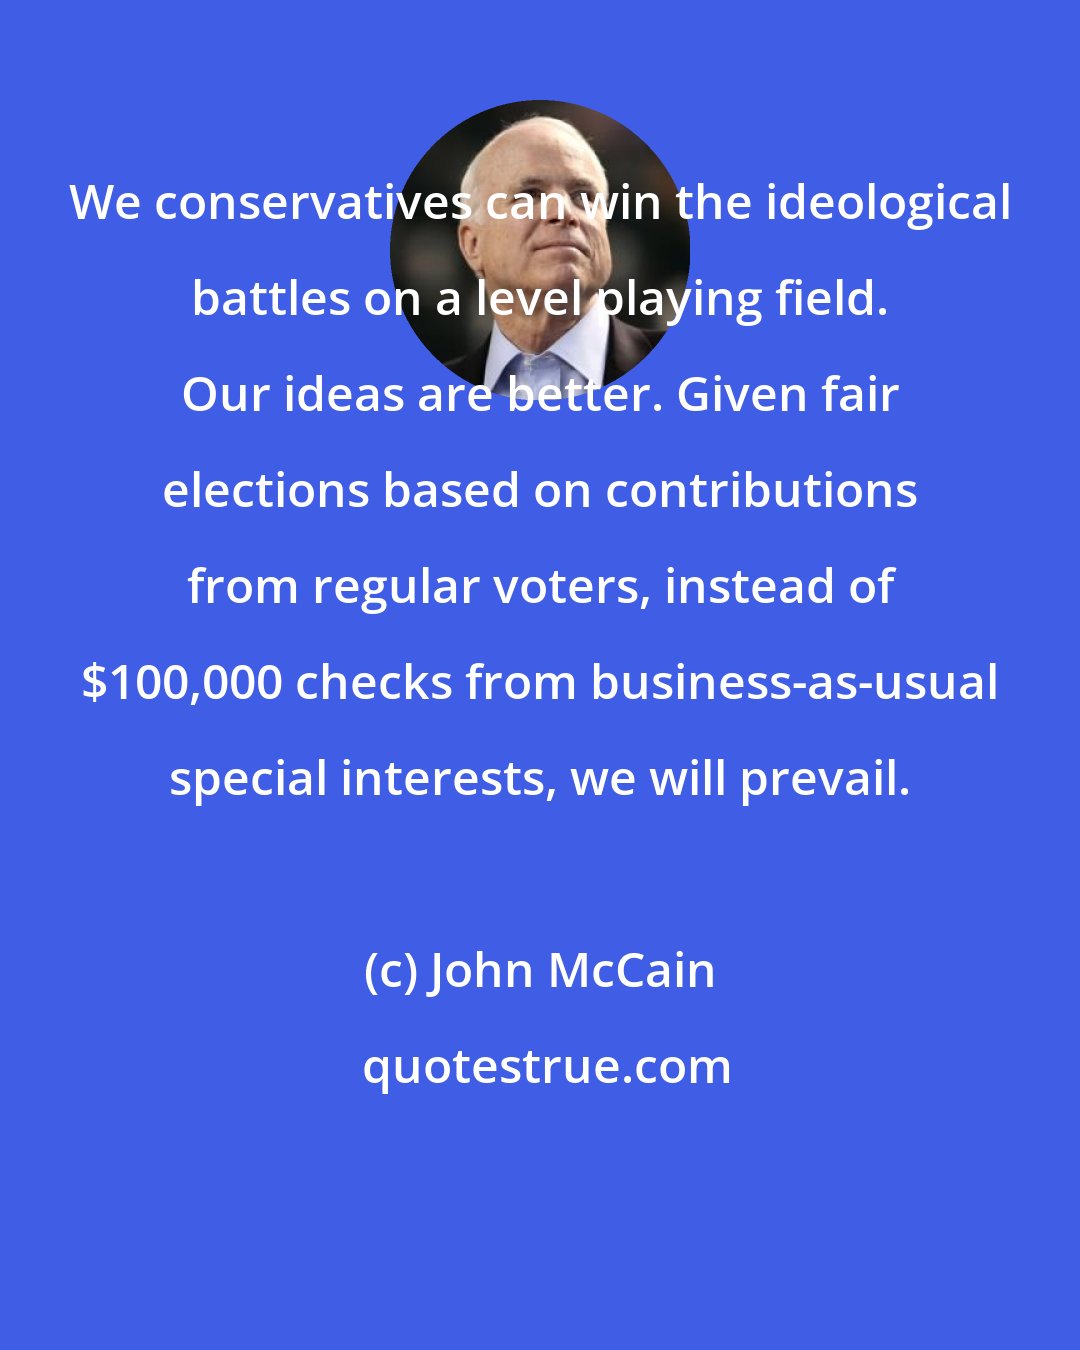 John McCain: We conservatives can win the ideological battles on a level playing field. Our ideas are better. Given fair elections based on contributions from regular voters, instead of $100,000 checks from business-as-usual special interests, we will prevail.